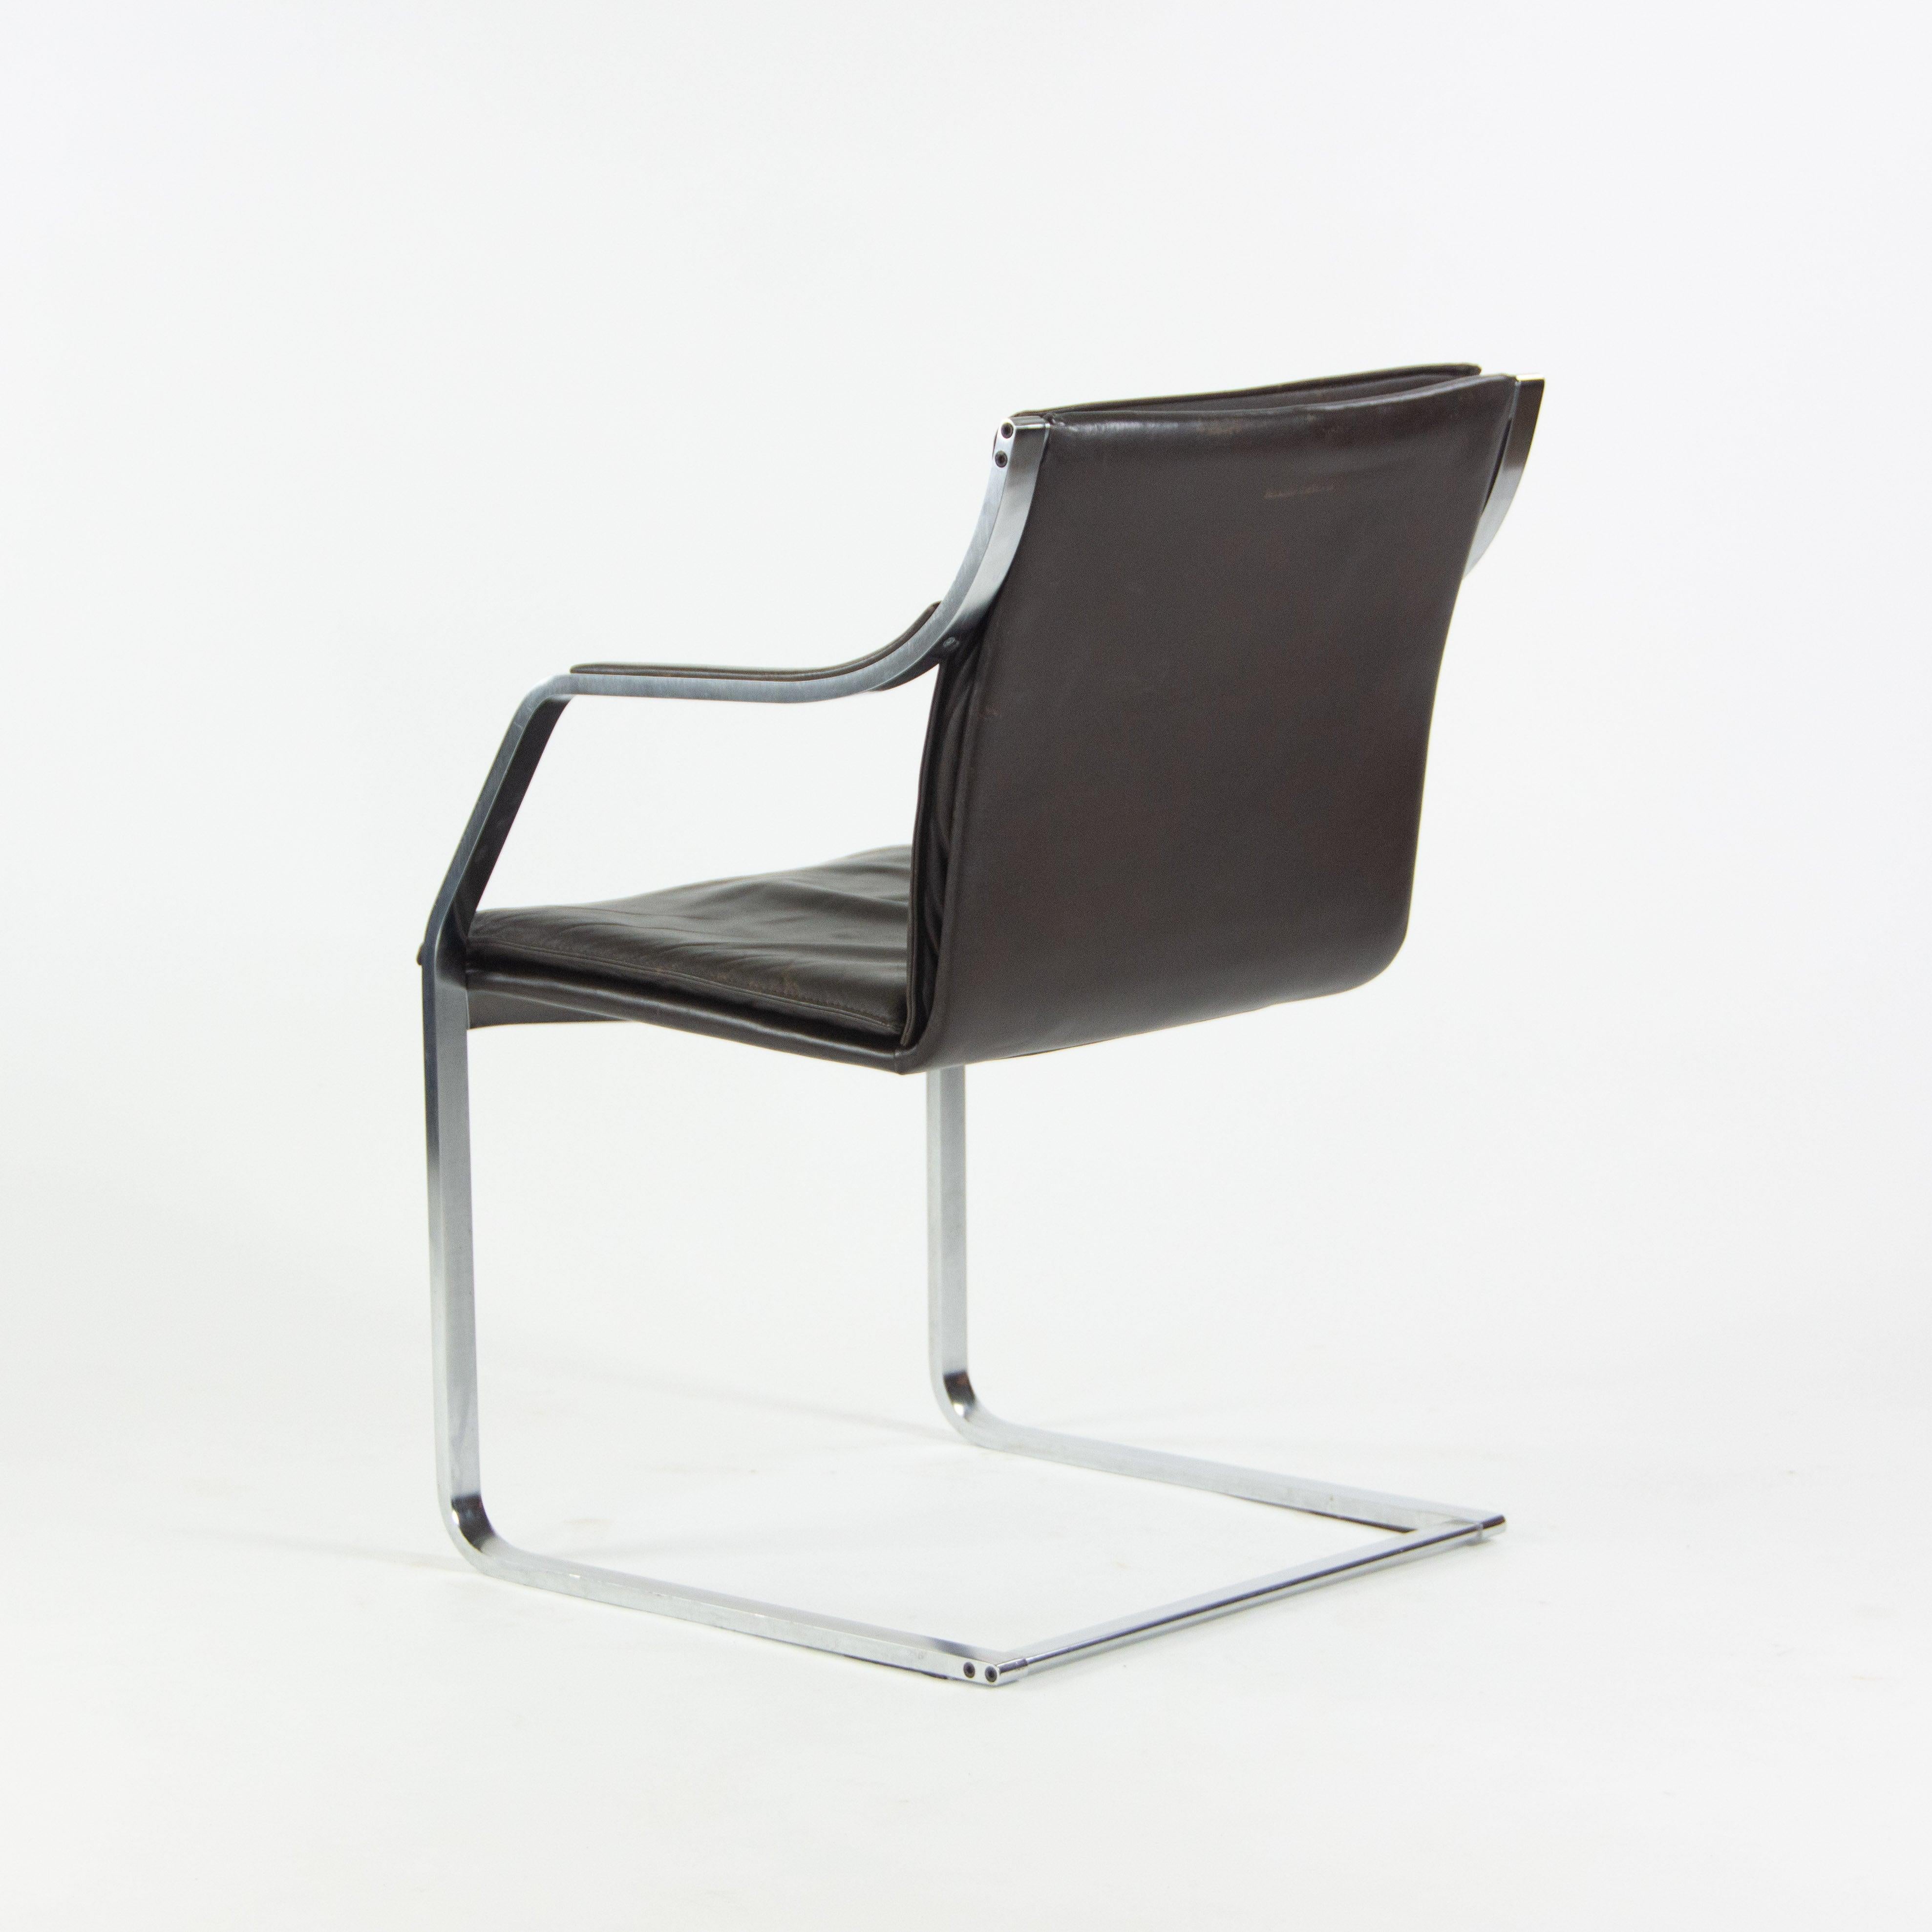 Rudolf B. Glatzel Vintage Walter Knoll Art Collection Leather & Stainless Chair For Sale 1